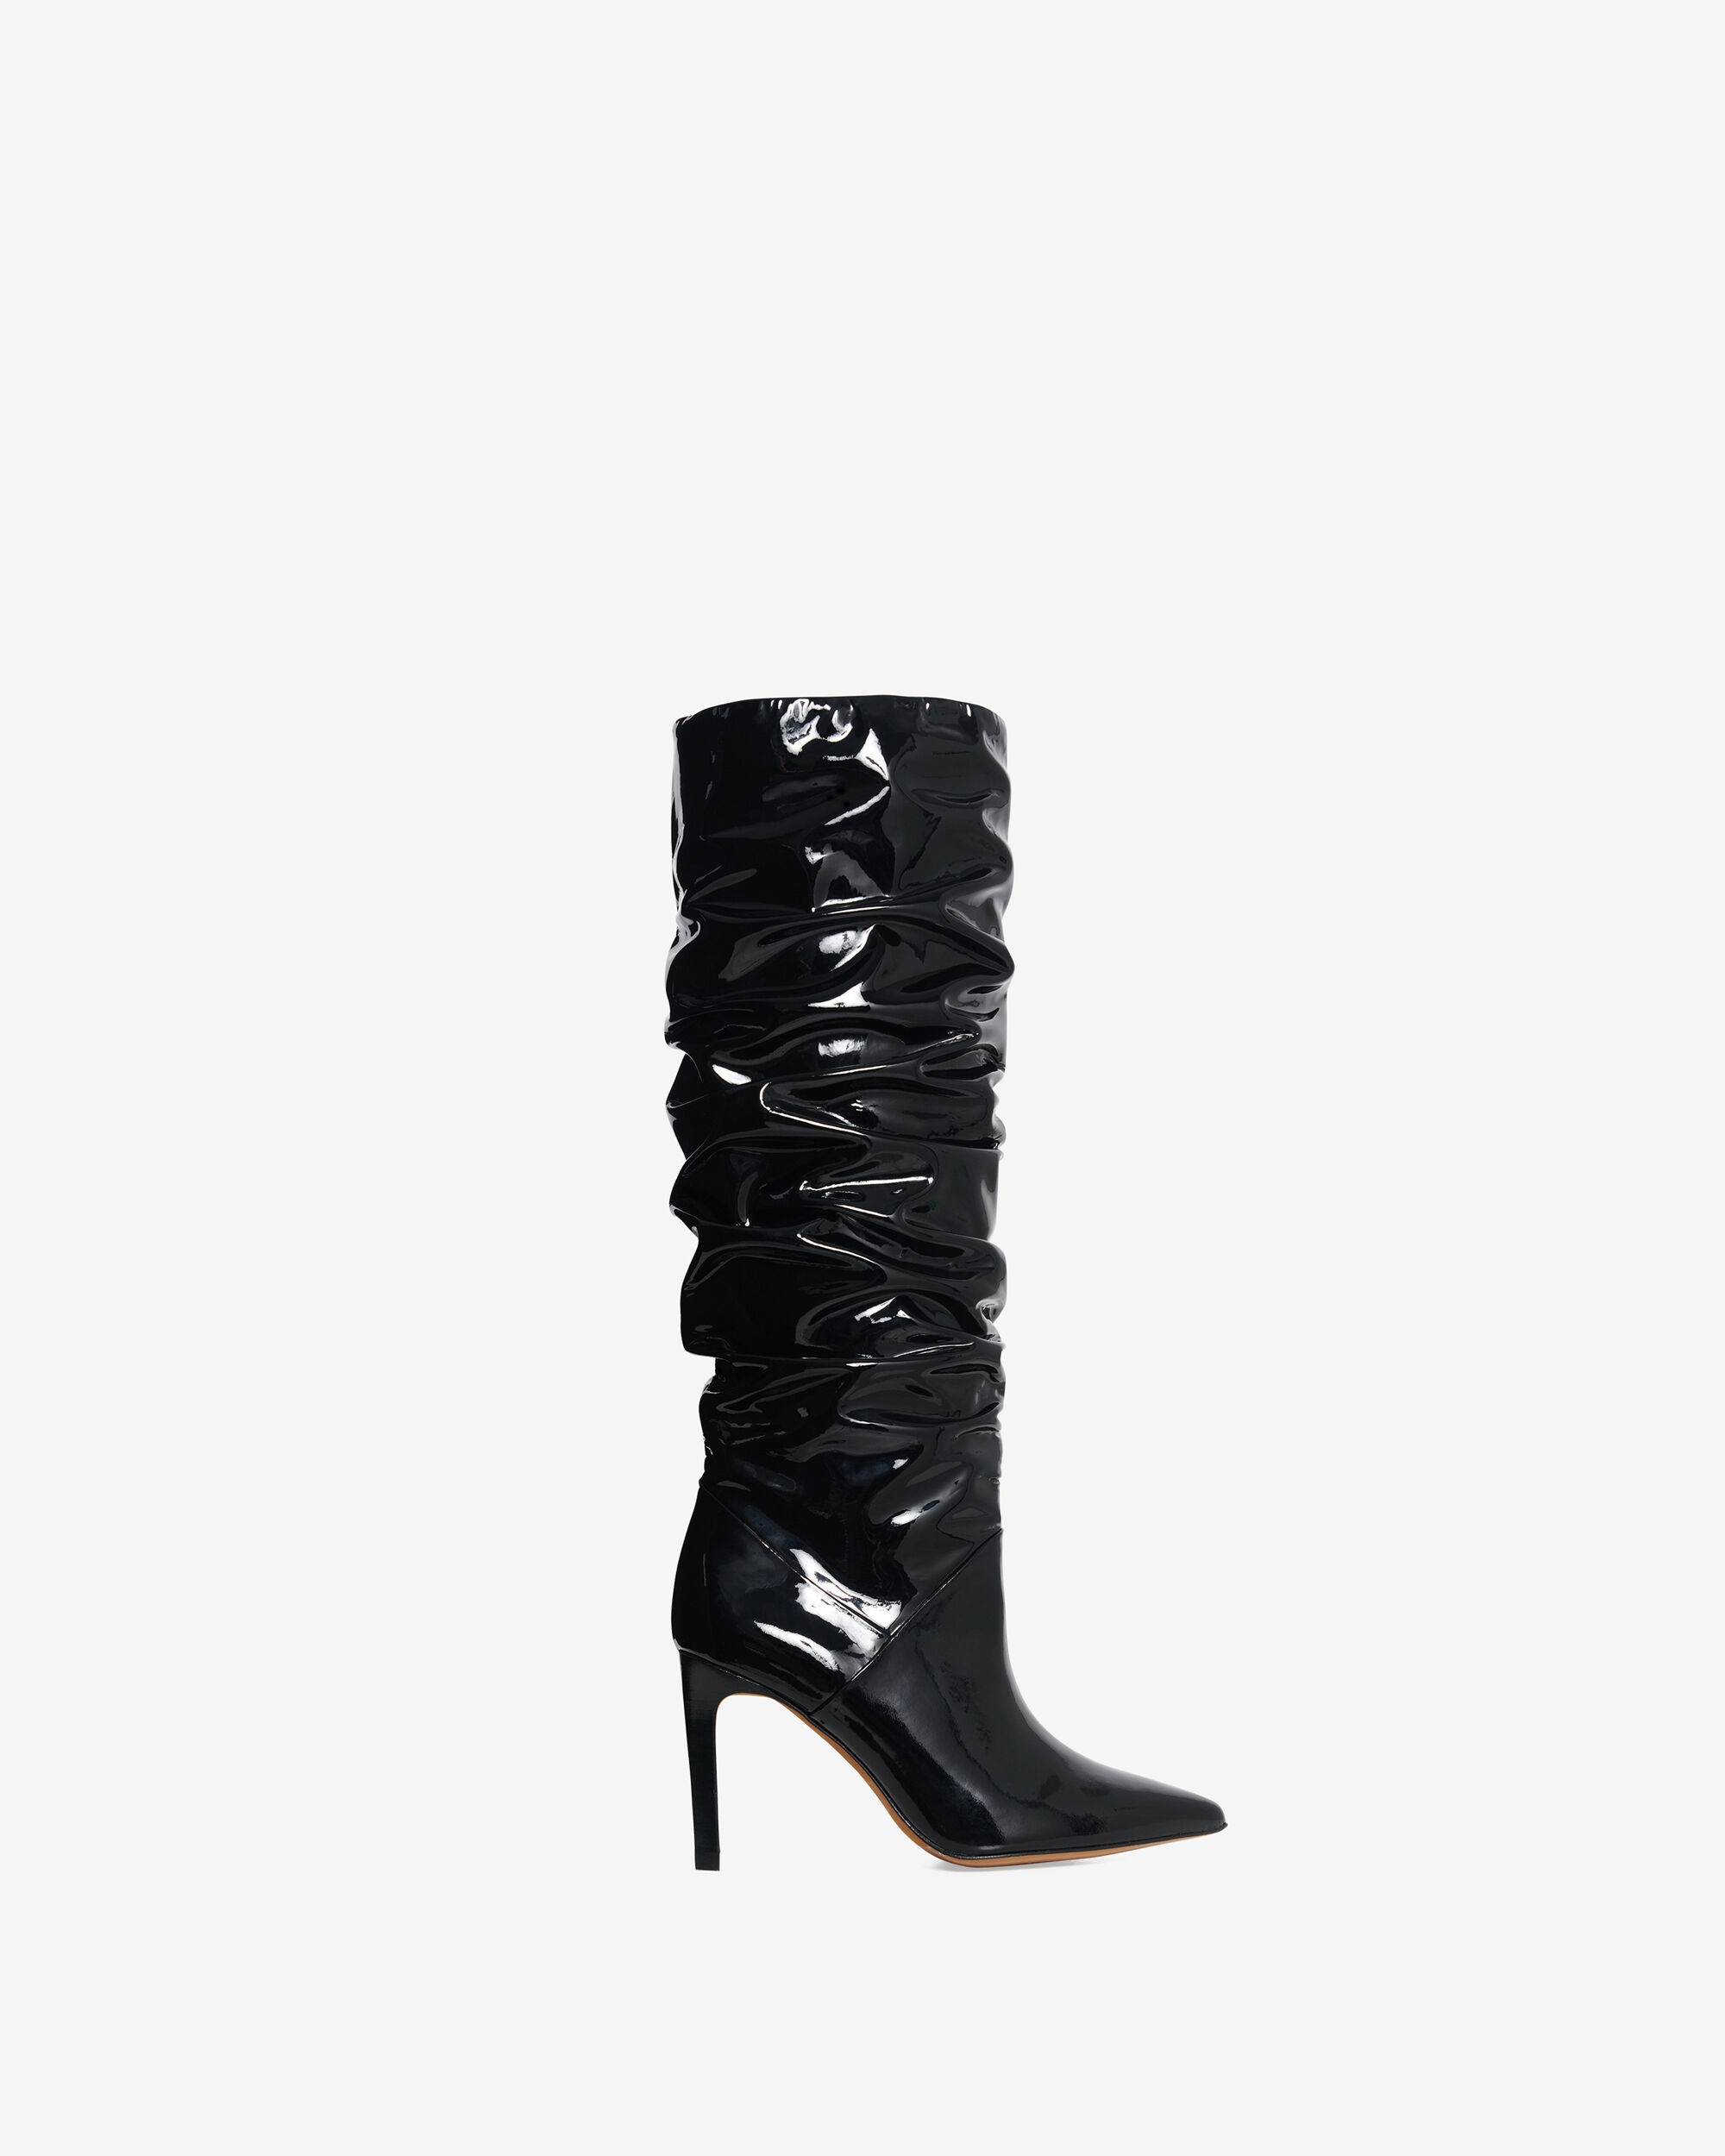 Black Ankle Boots Women Pointed Toe Lace Up High Heel Booties - Milanoo.com